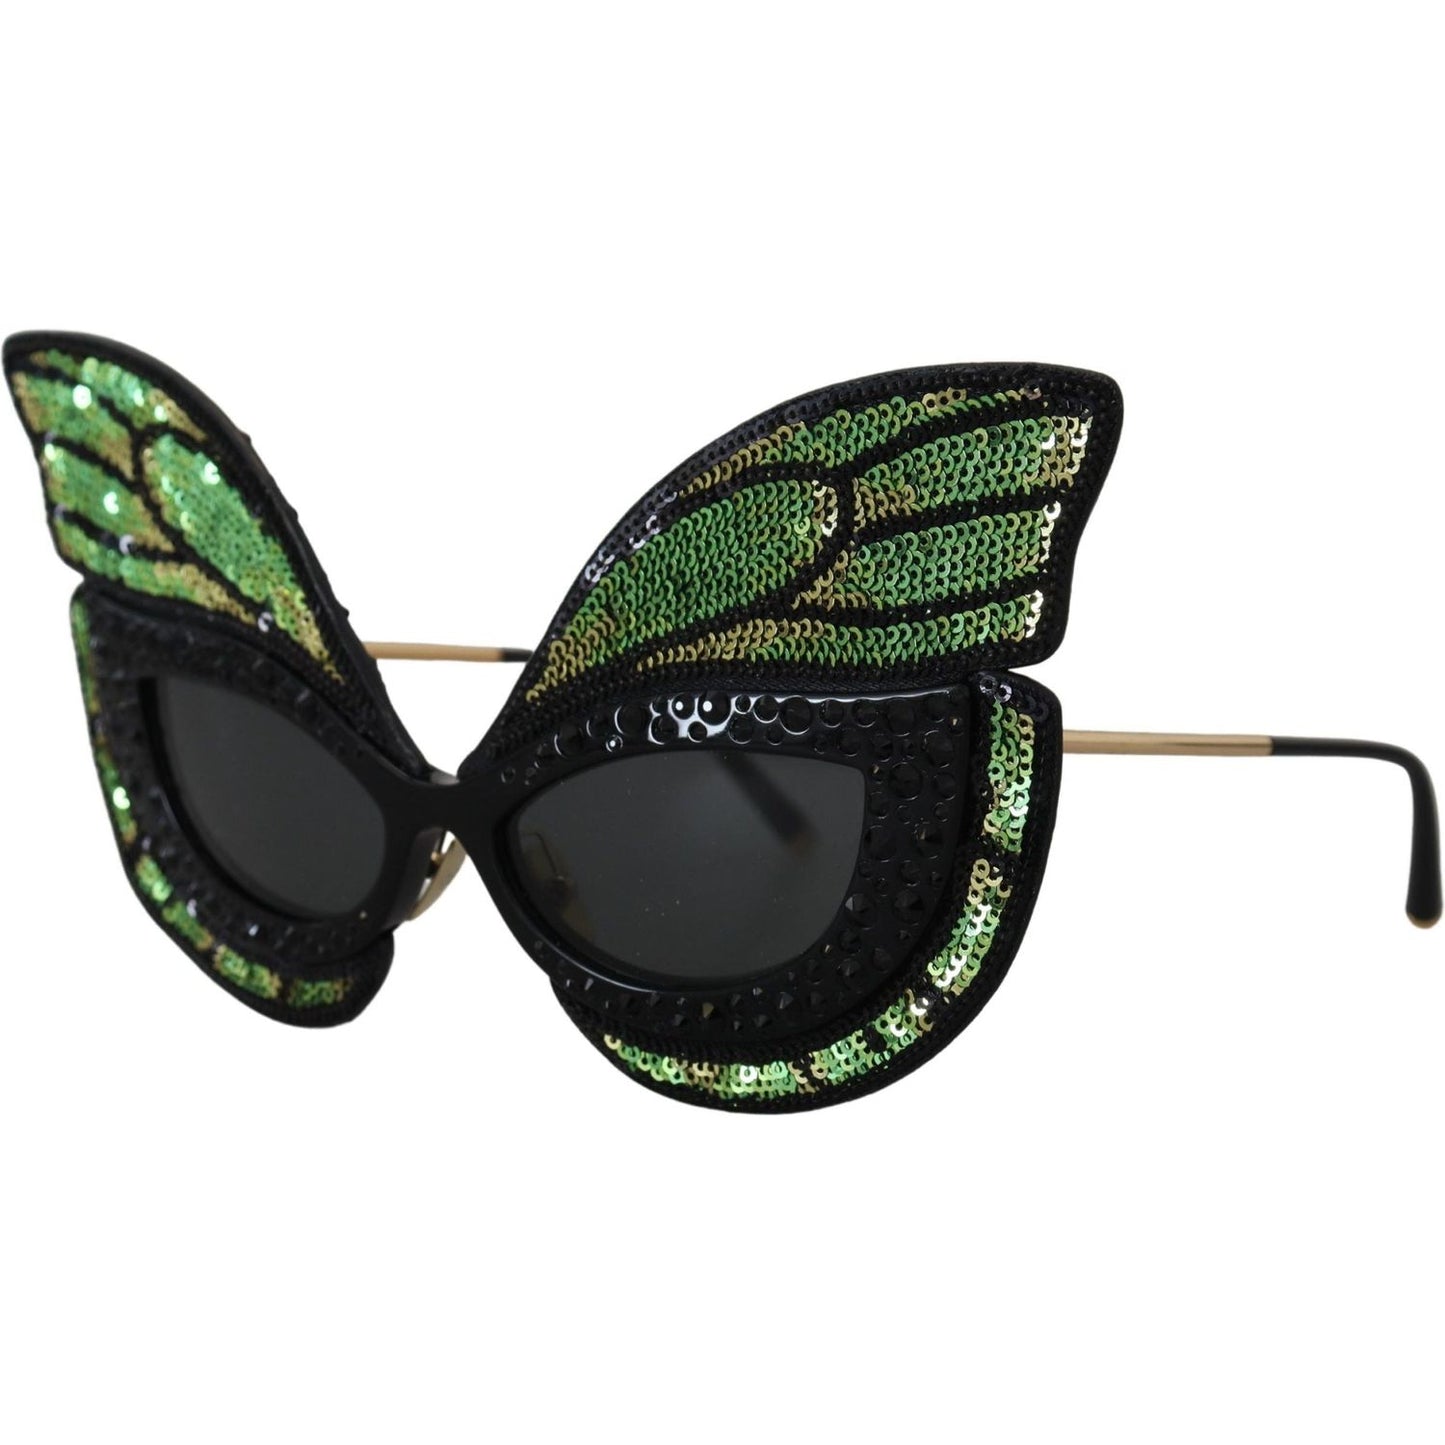 Dolce & Gabbana Exquisite Sequined Butterfly Sunglasses exquisite-sequined-butterfly-sunglasses IMG_4073-scaled-22efd07b-e6d.jpg